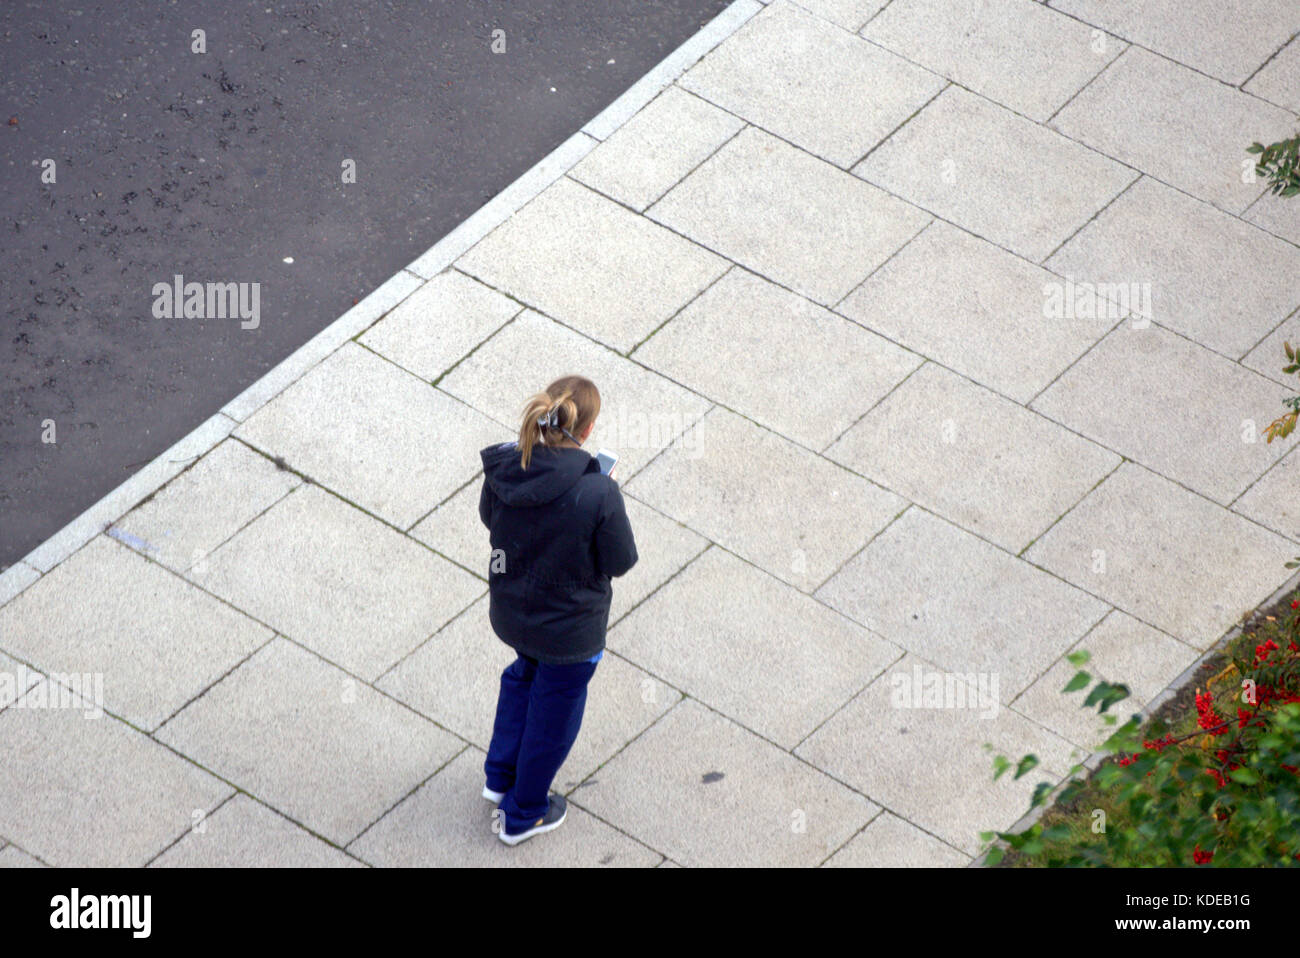 Queen Elizabeth University Hospital,Royal Hospital for Children, patients on path from above woman female girl worker on smart phone Stock Photo